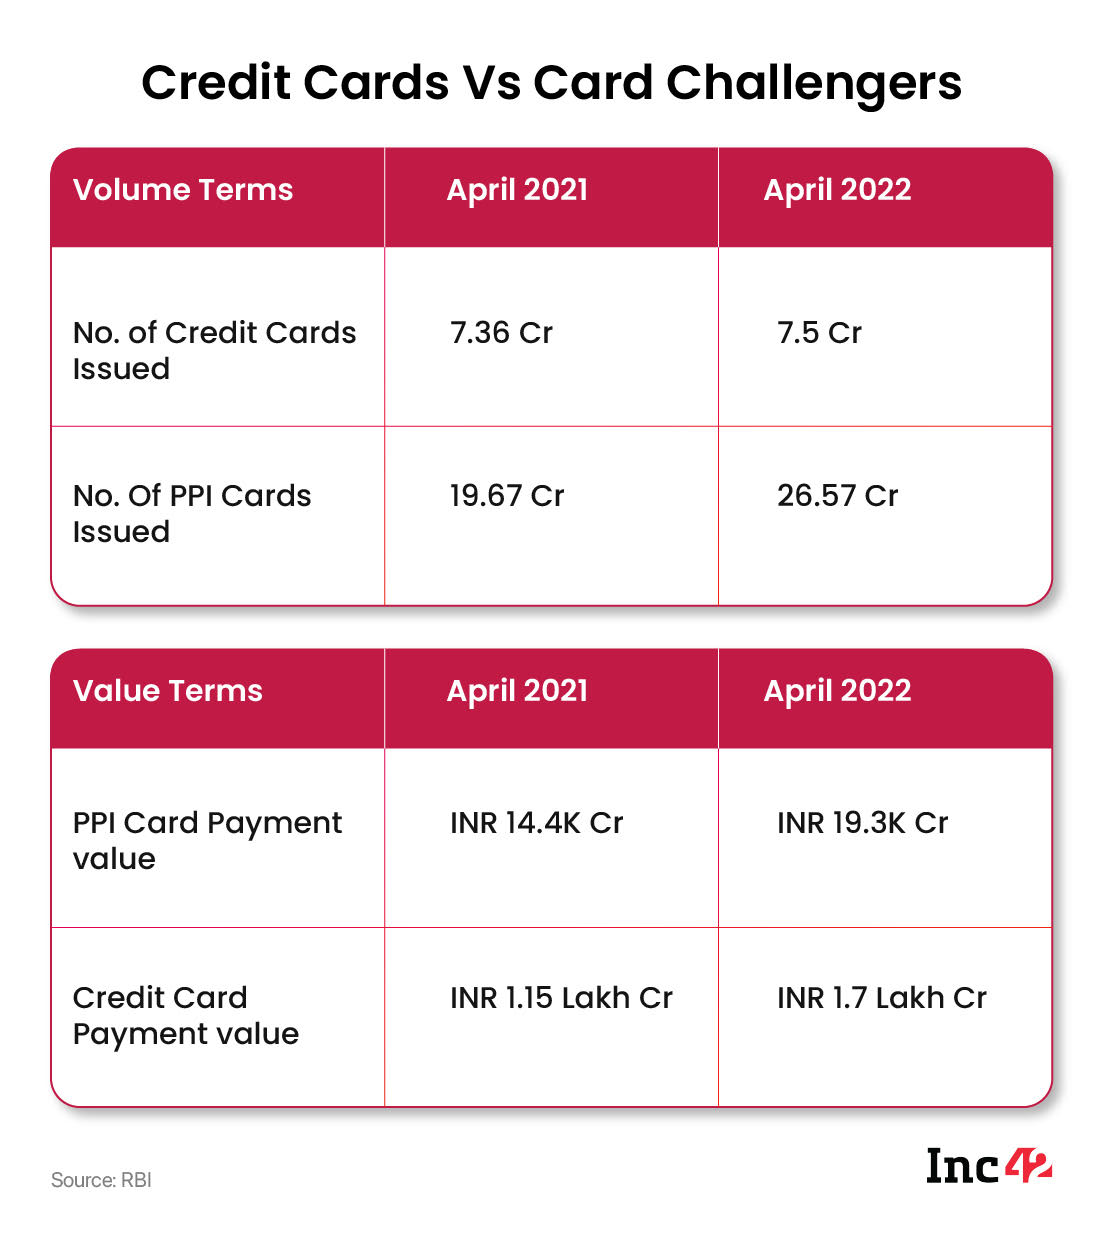 Credit Card vs Card Challengers